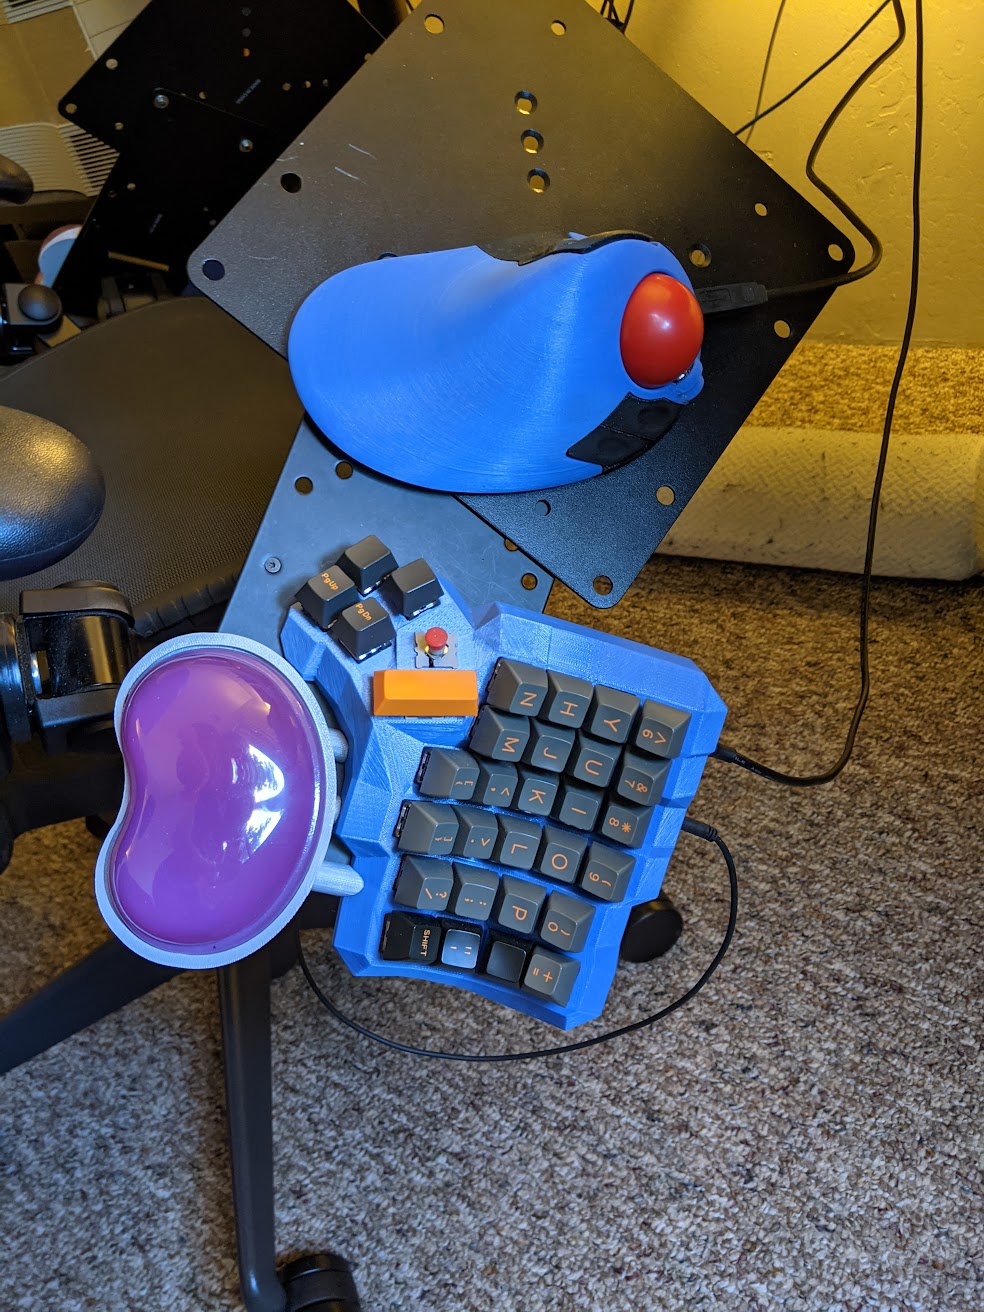 vertical keyboard tray with trackball and keyboard magnetically attached